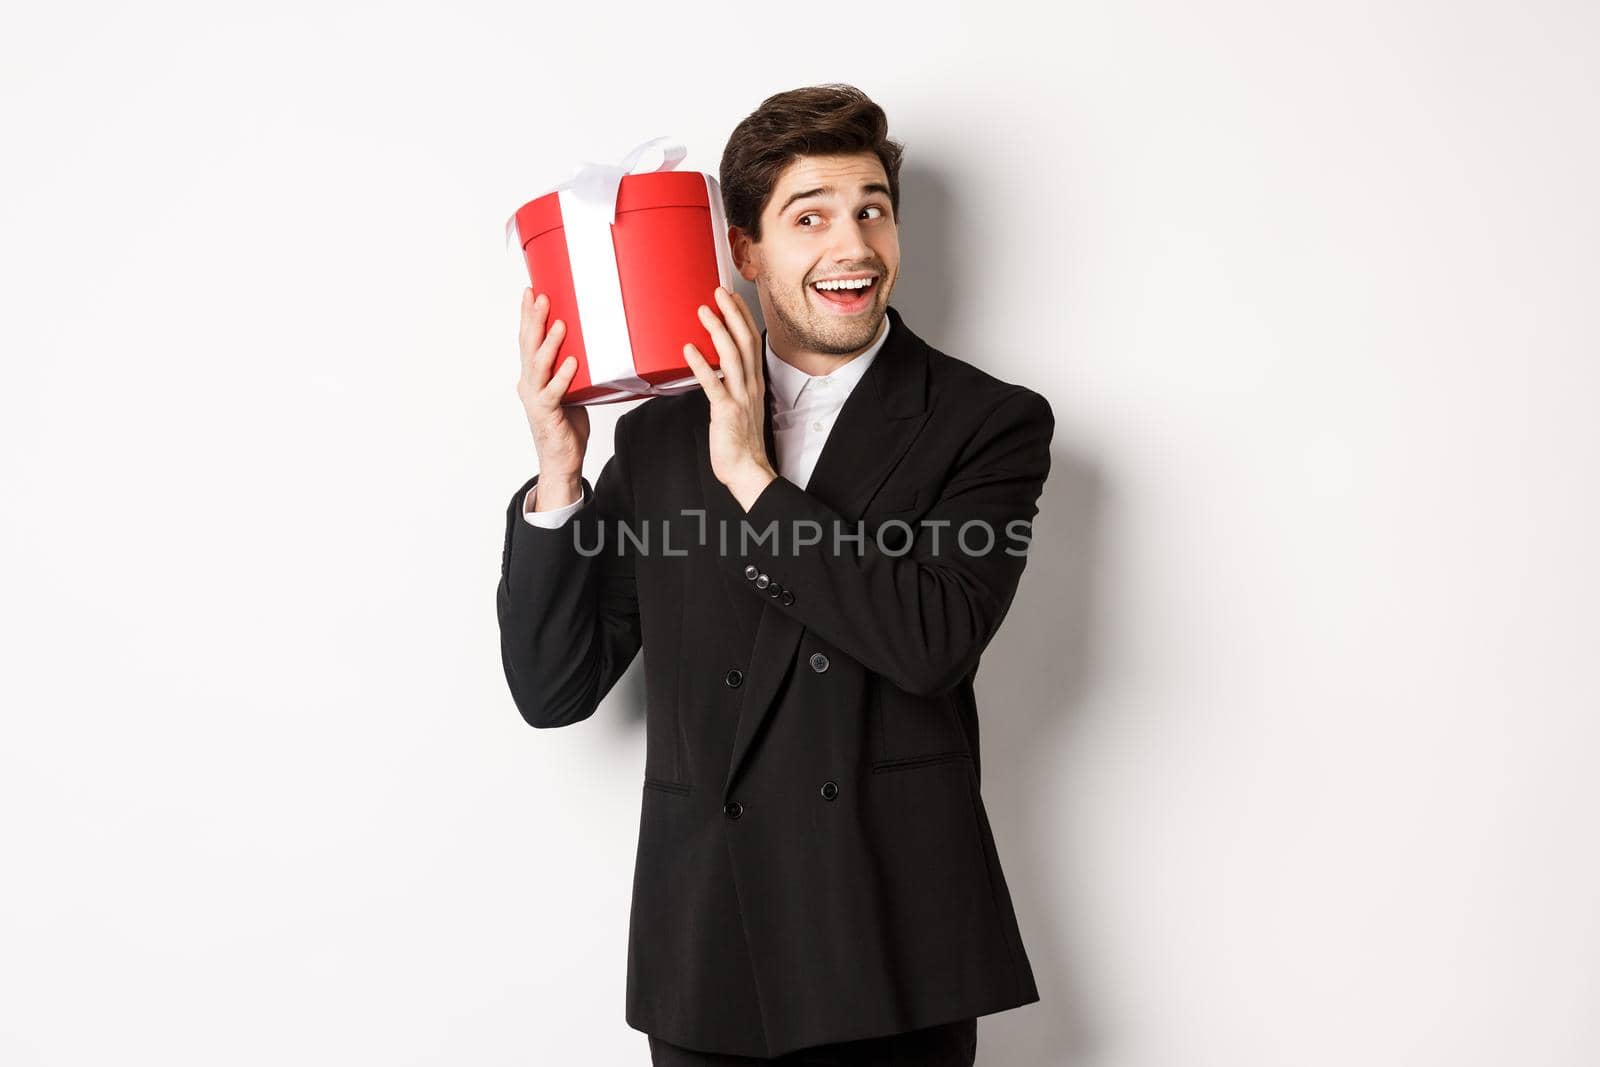 Concept of christmas holidays, celebration and lifestyle. Handsome man in black suit, shaking a box with gift, wondering whats inside, standing against white background.